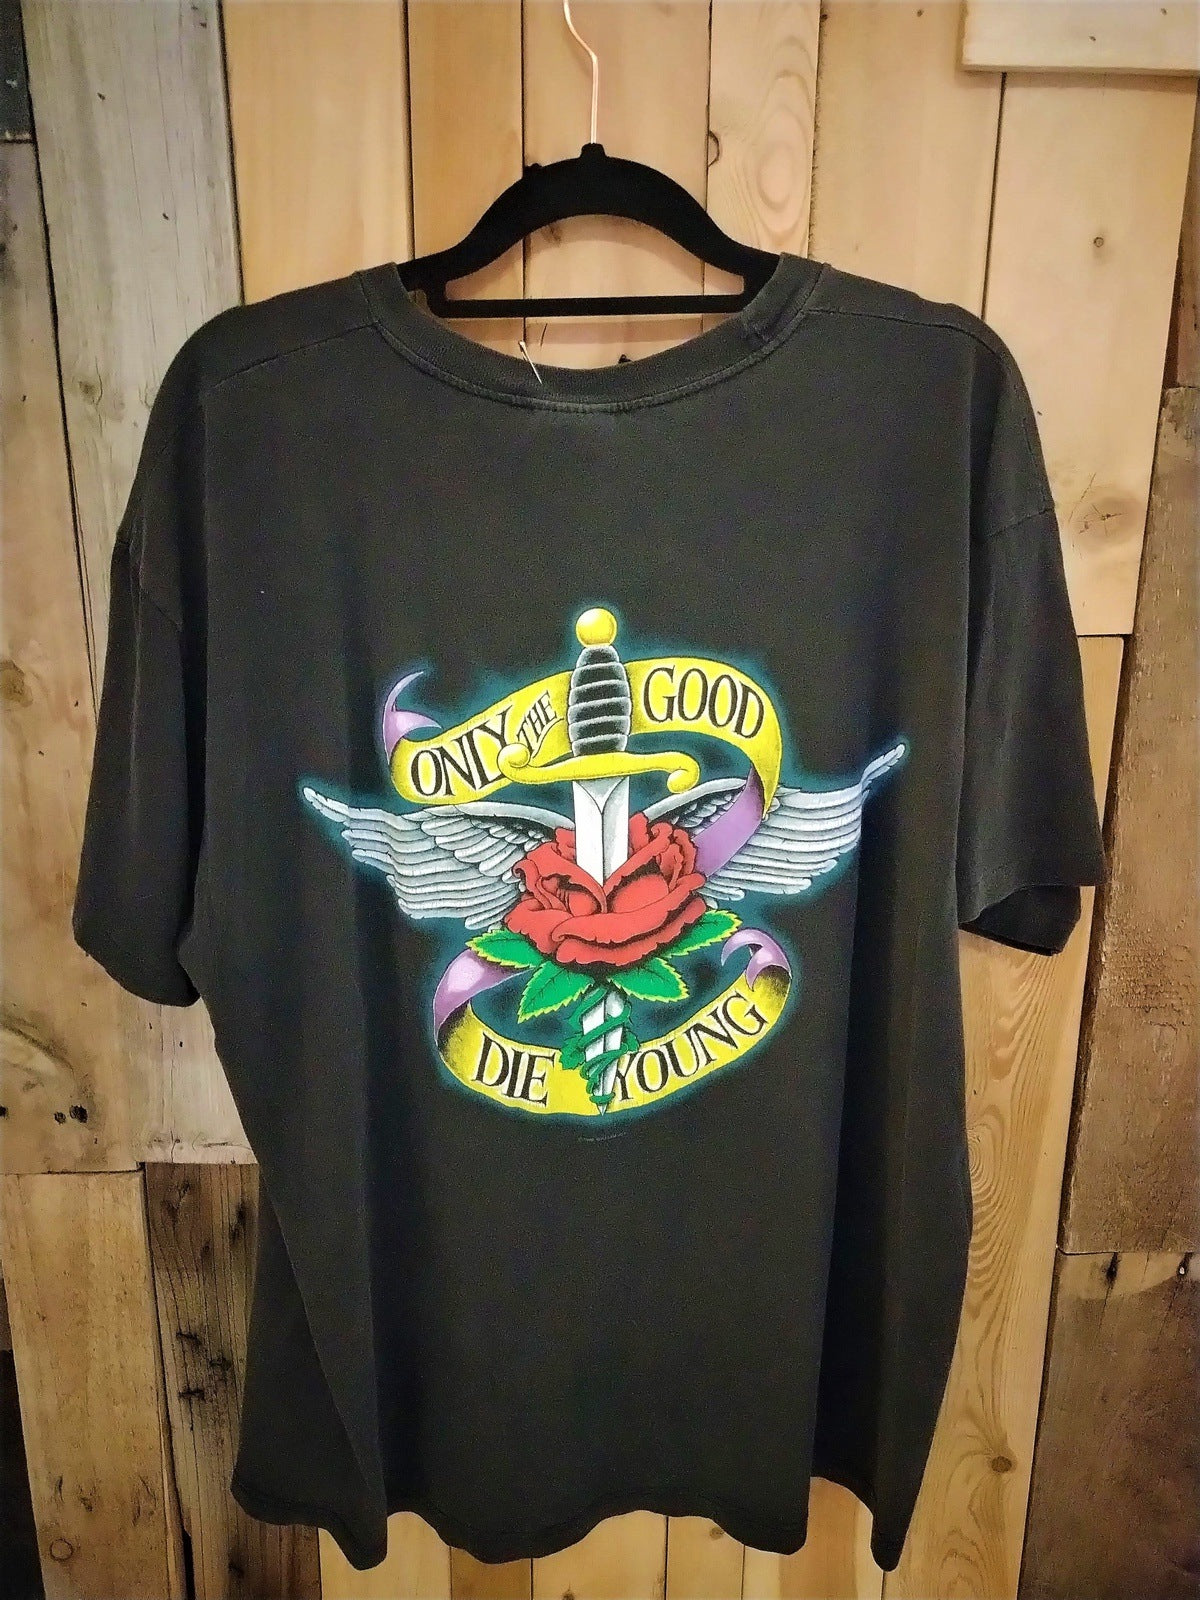 Billy Joel "Storm Front- Only the Good Die Young" T Shirt Size XL